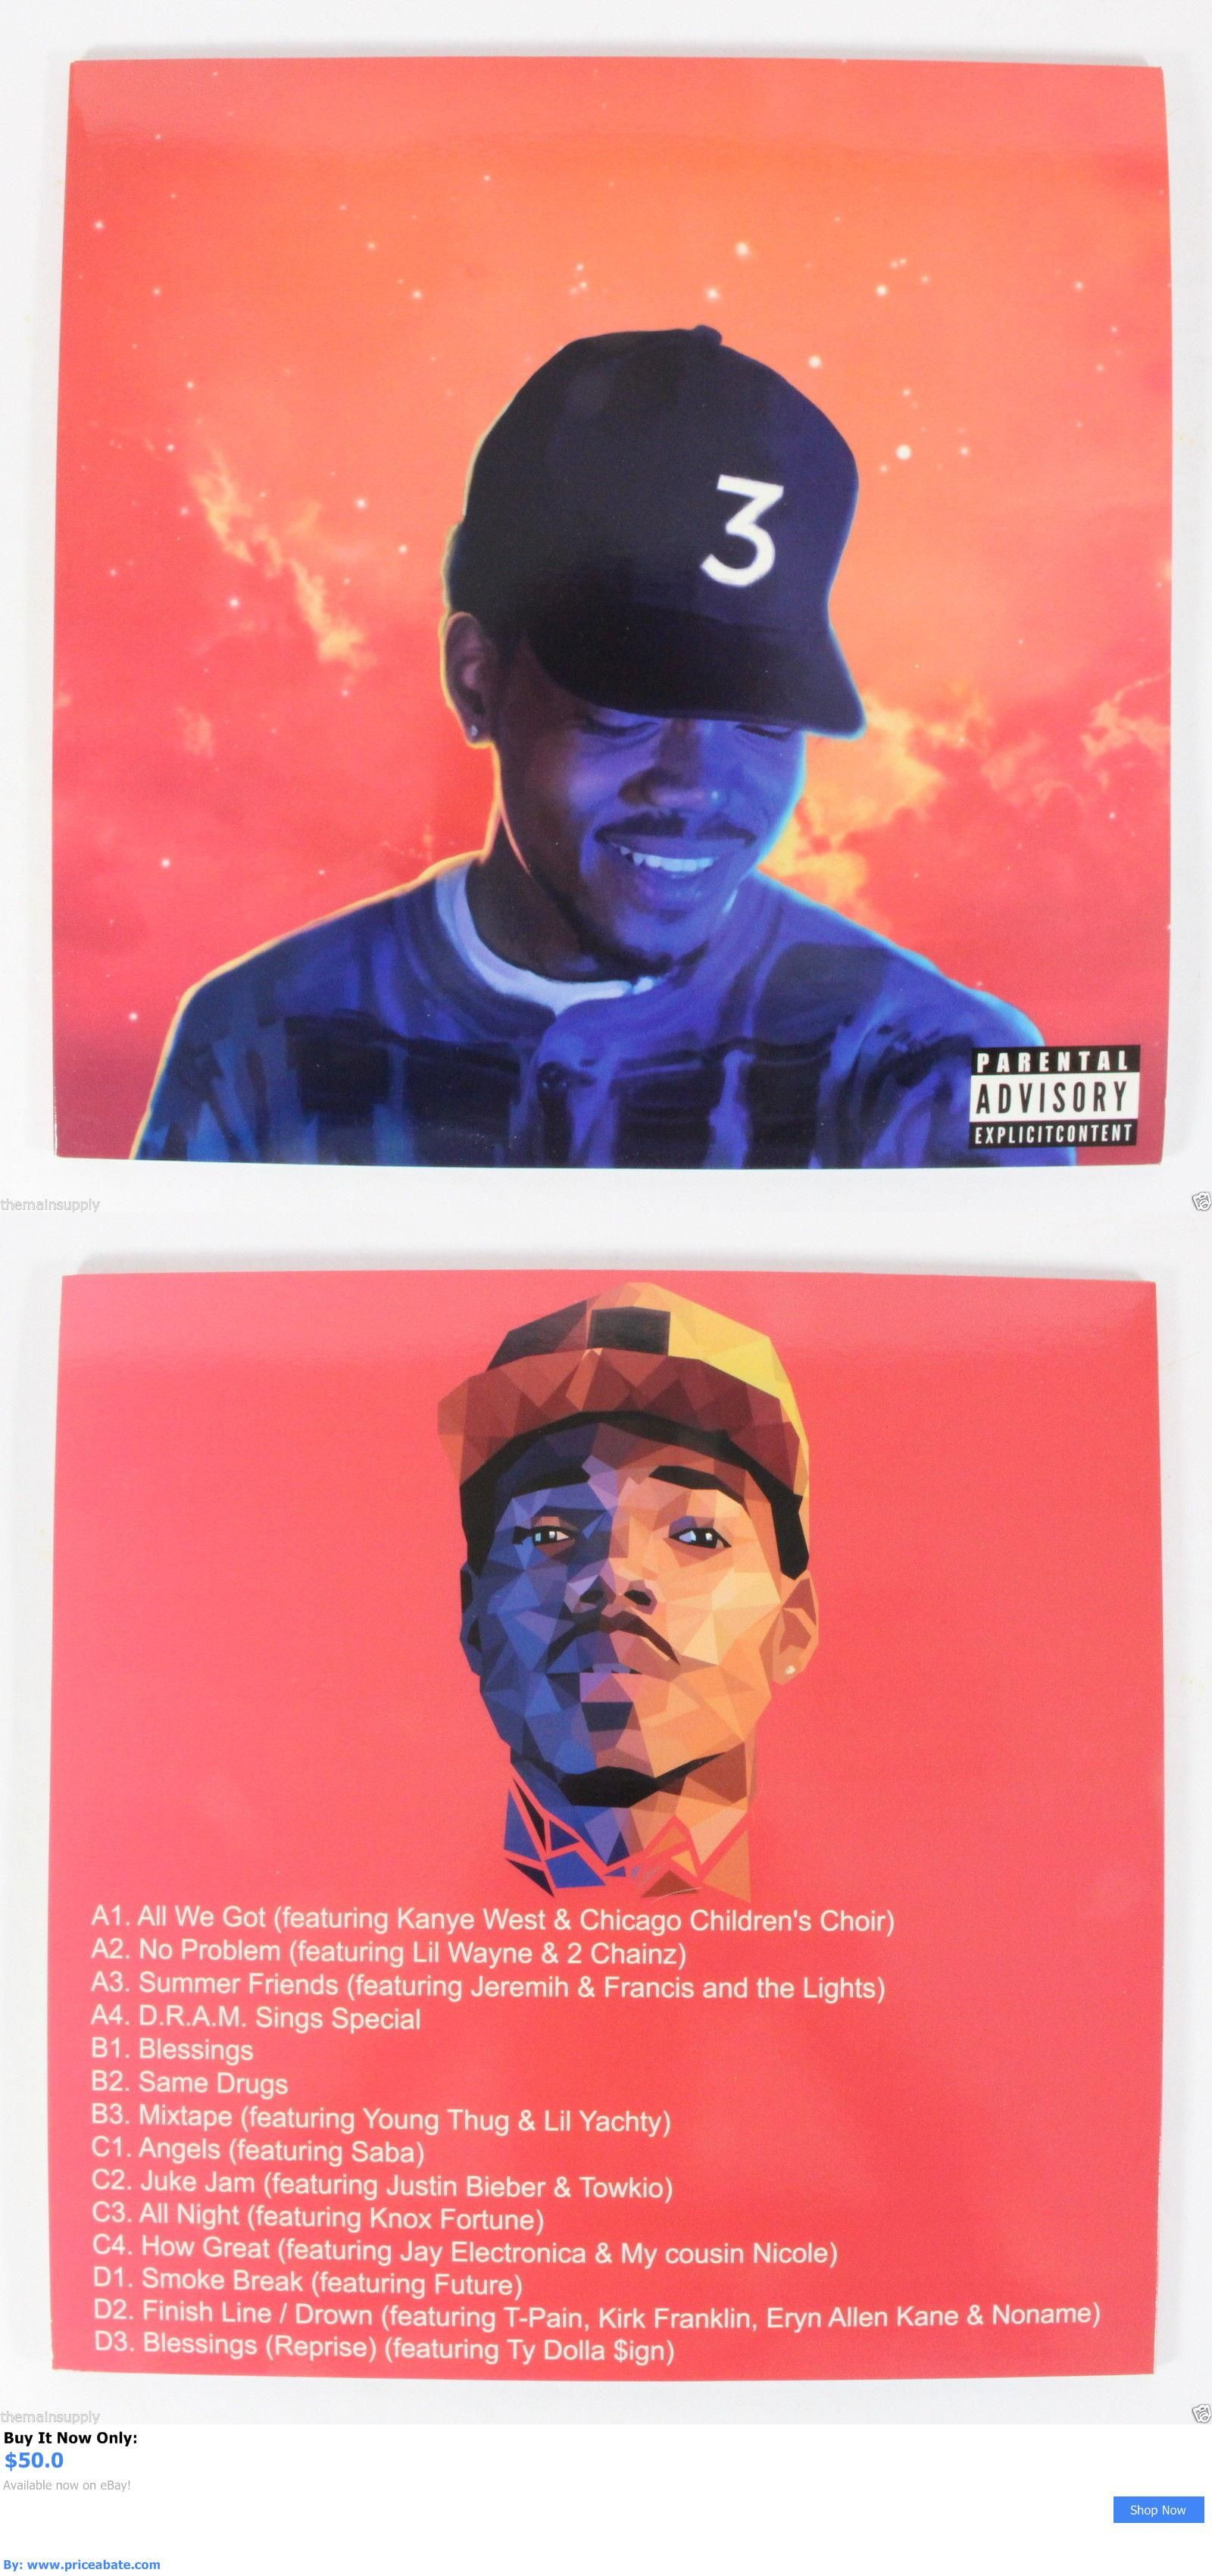 Buy Chance The Rapper Coloring Book
 Music Albums Chance The Rapper Coloring Book [2Lp